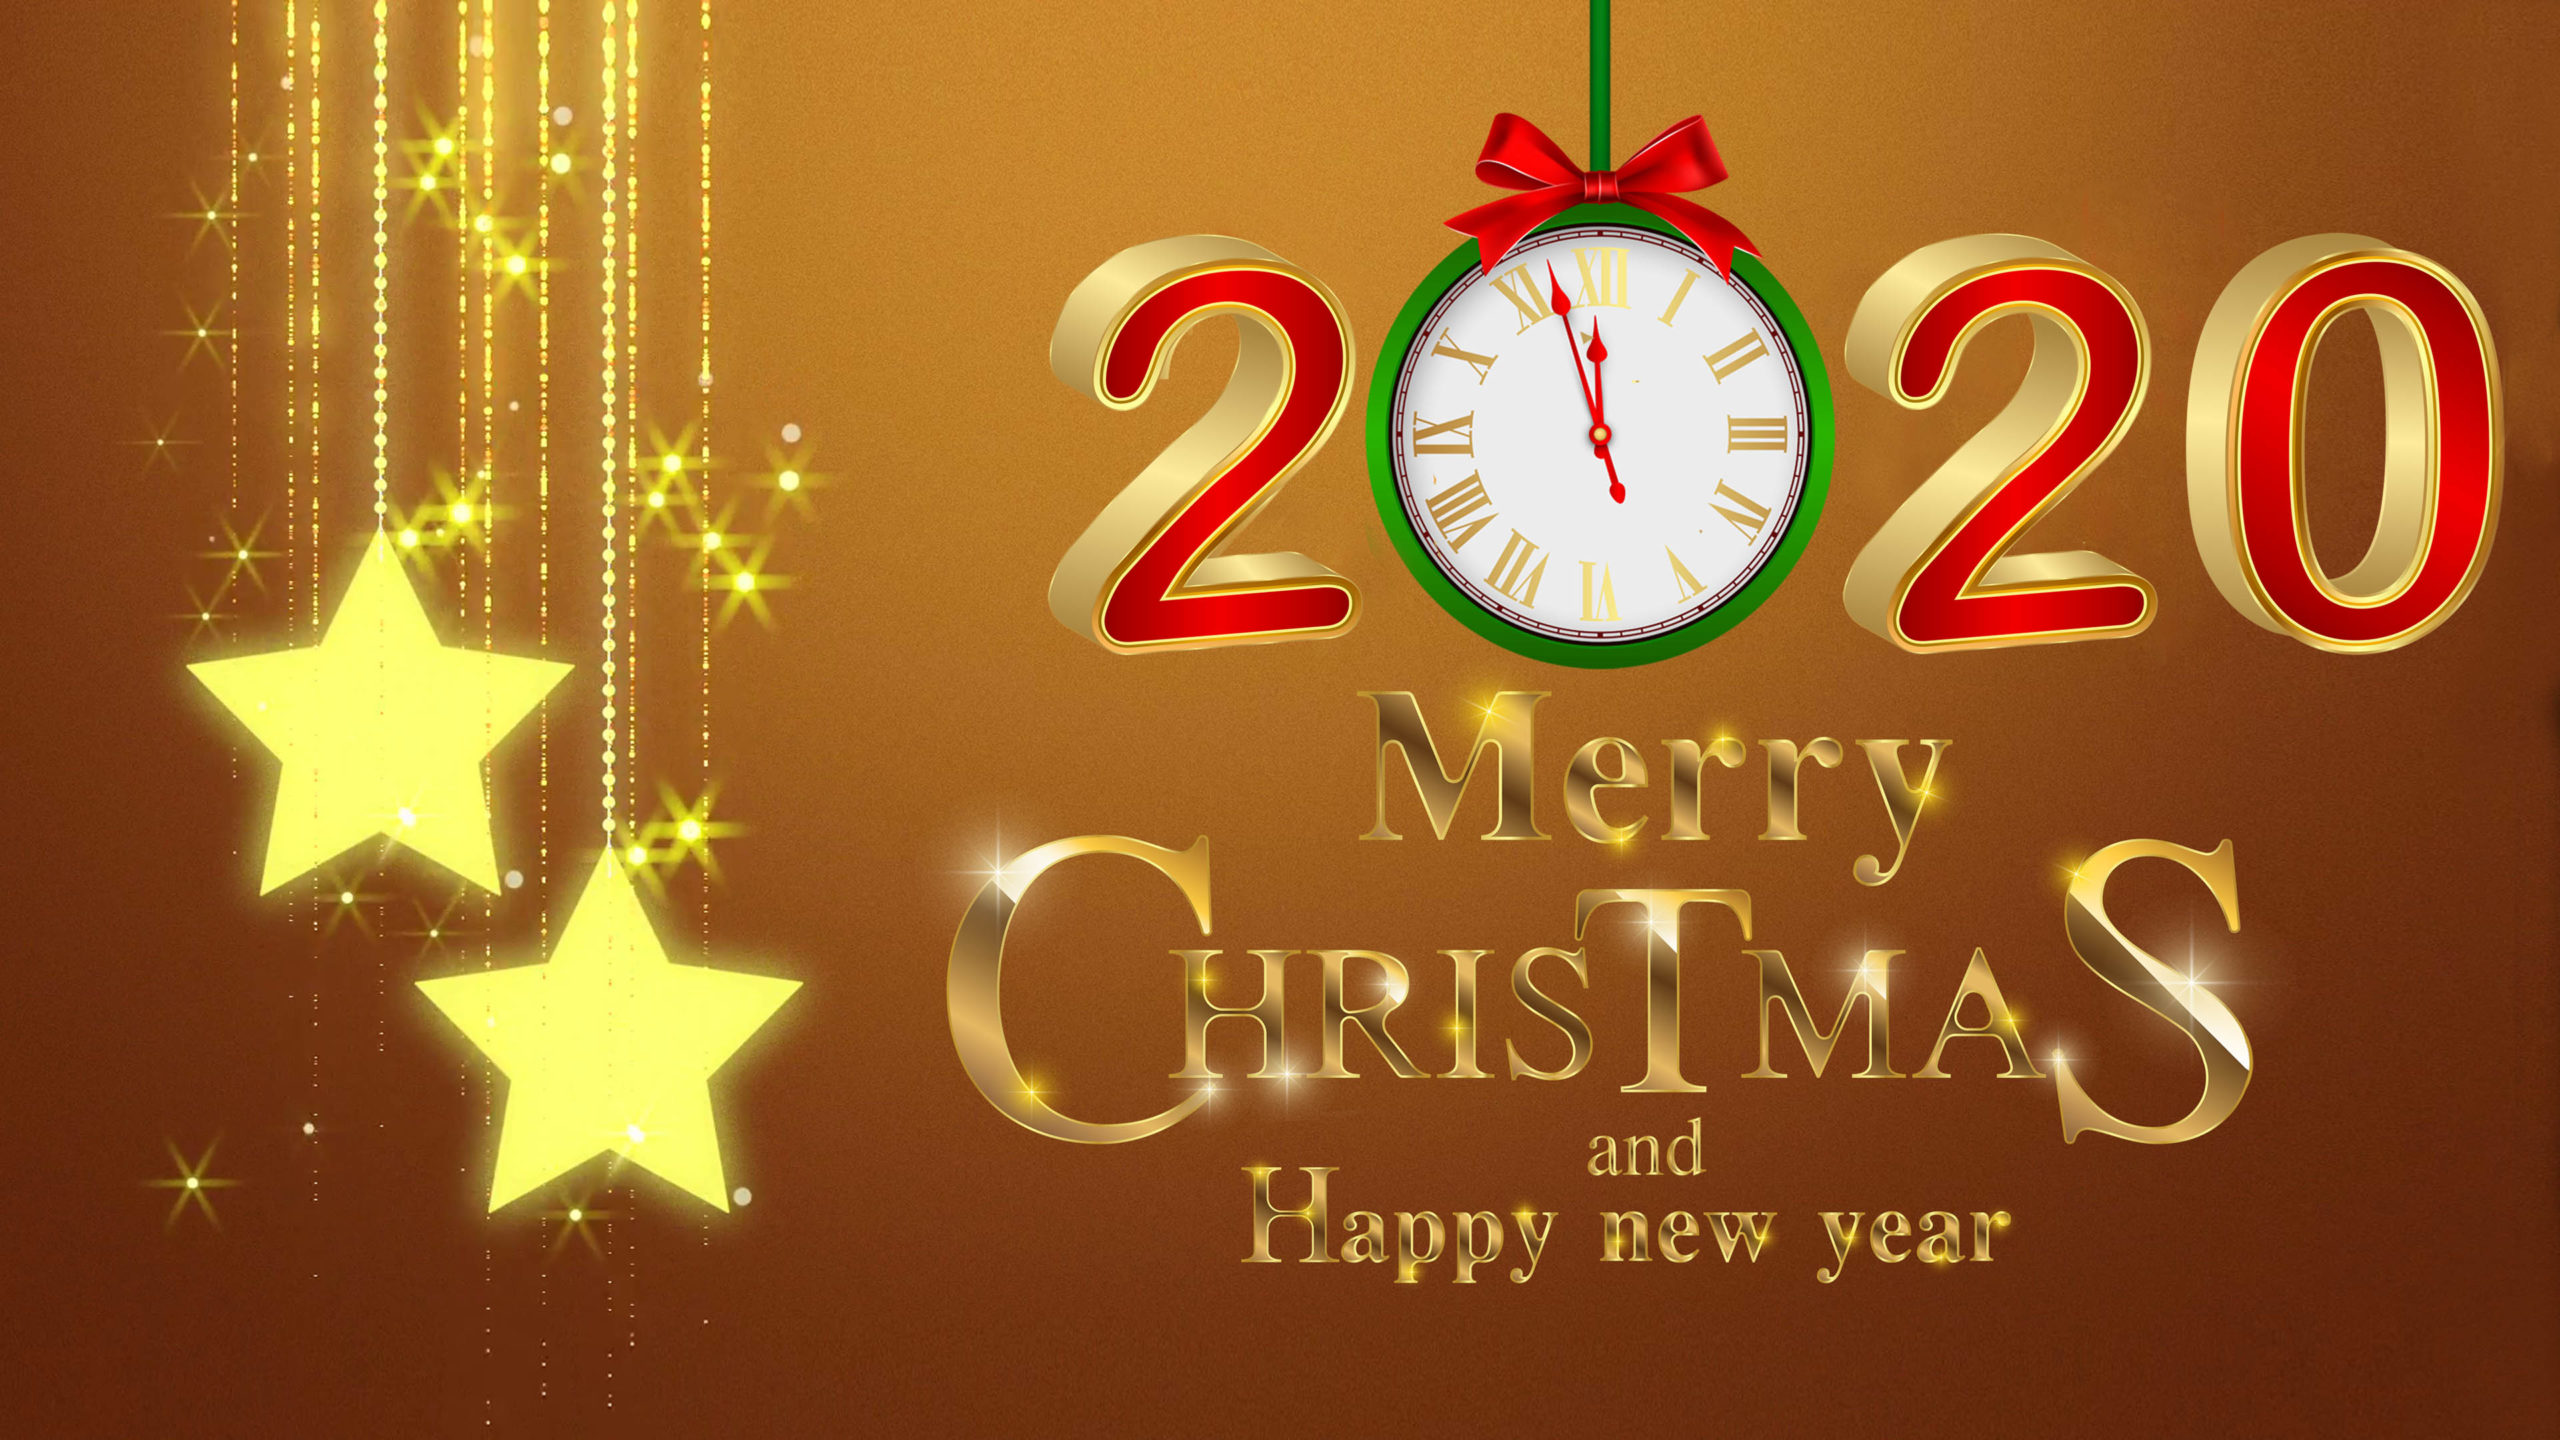 Merry Christmas Happy New Year 2020 Images | Free Vectors